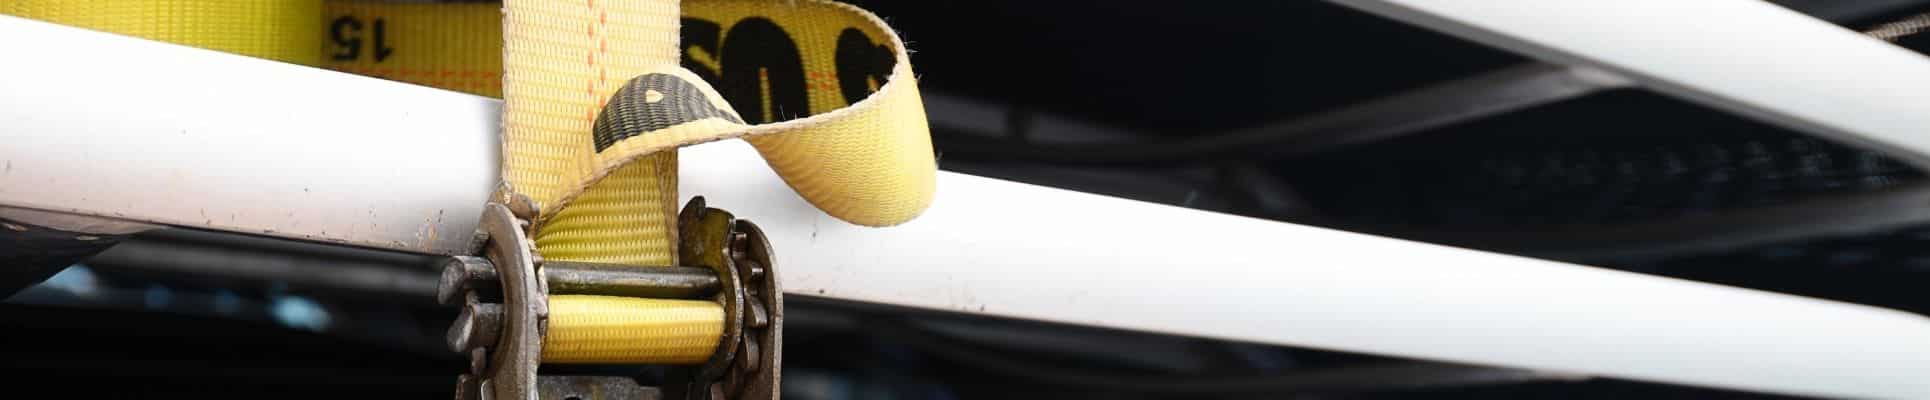 Cargo Load Bars vs. Ratchet Straps: What’s the Difference?